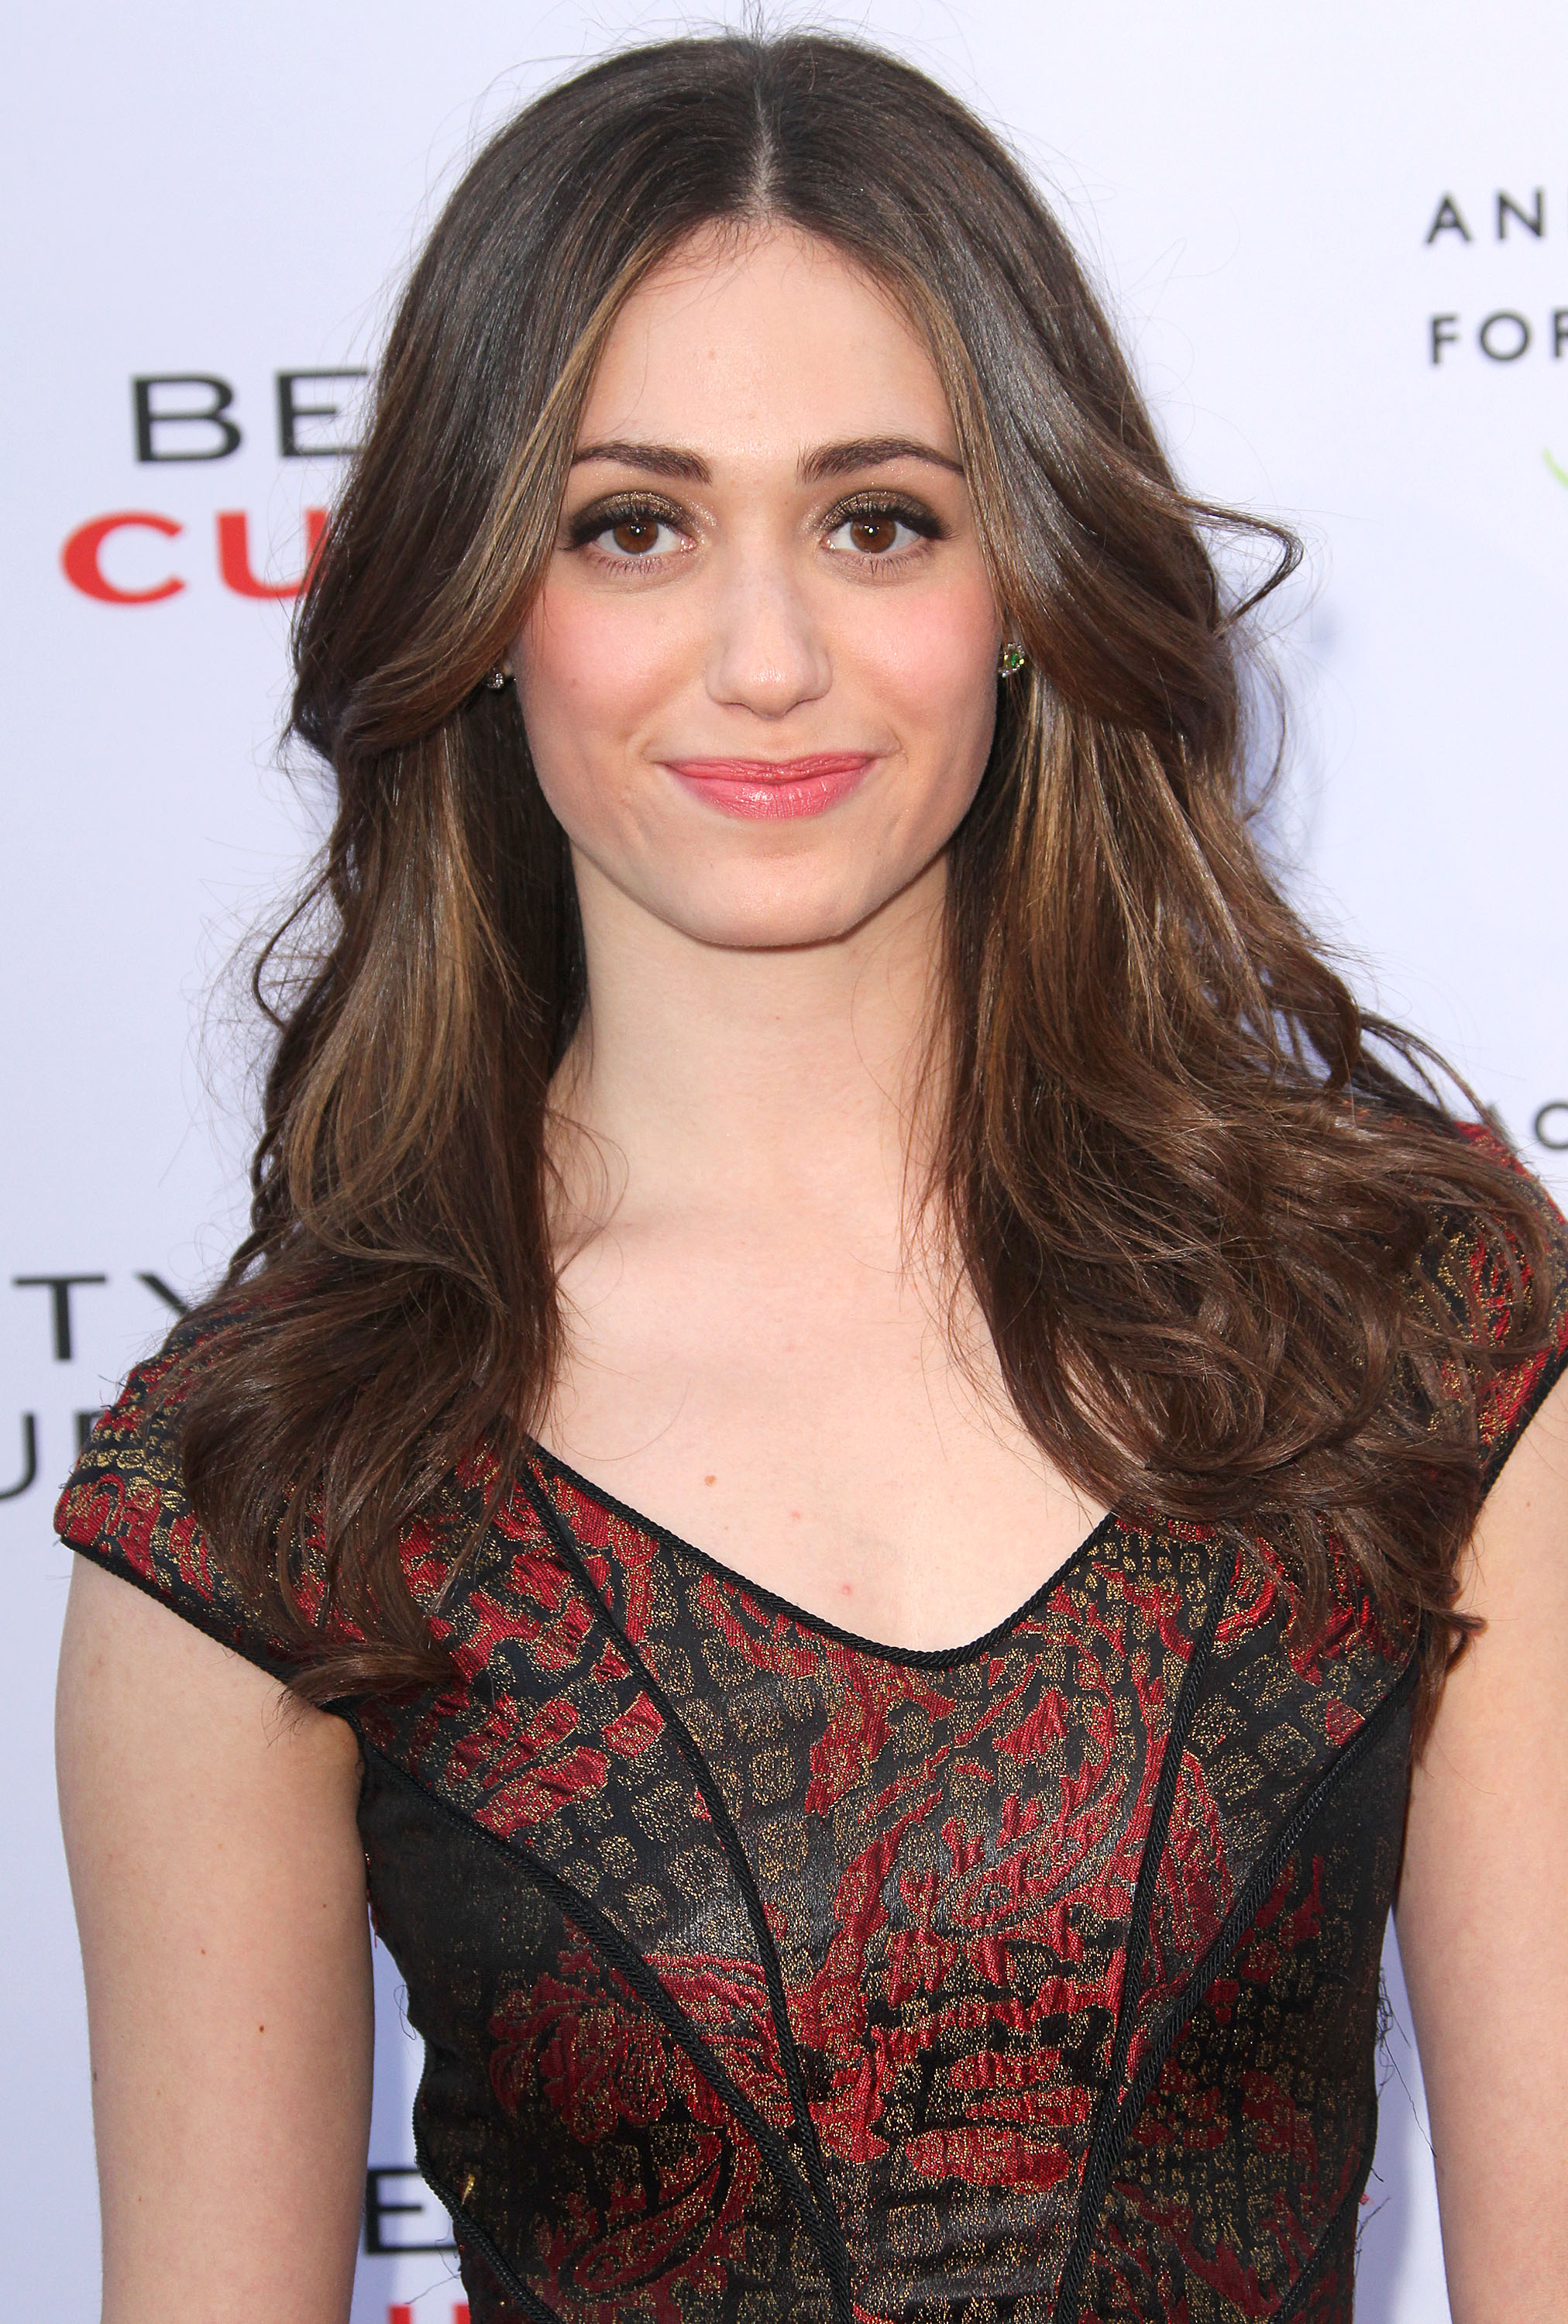 Emmy Rossum photo 188 of 1477 pics, wallpaper - photo #380934 - ThePlace2